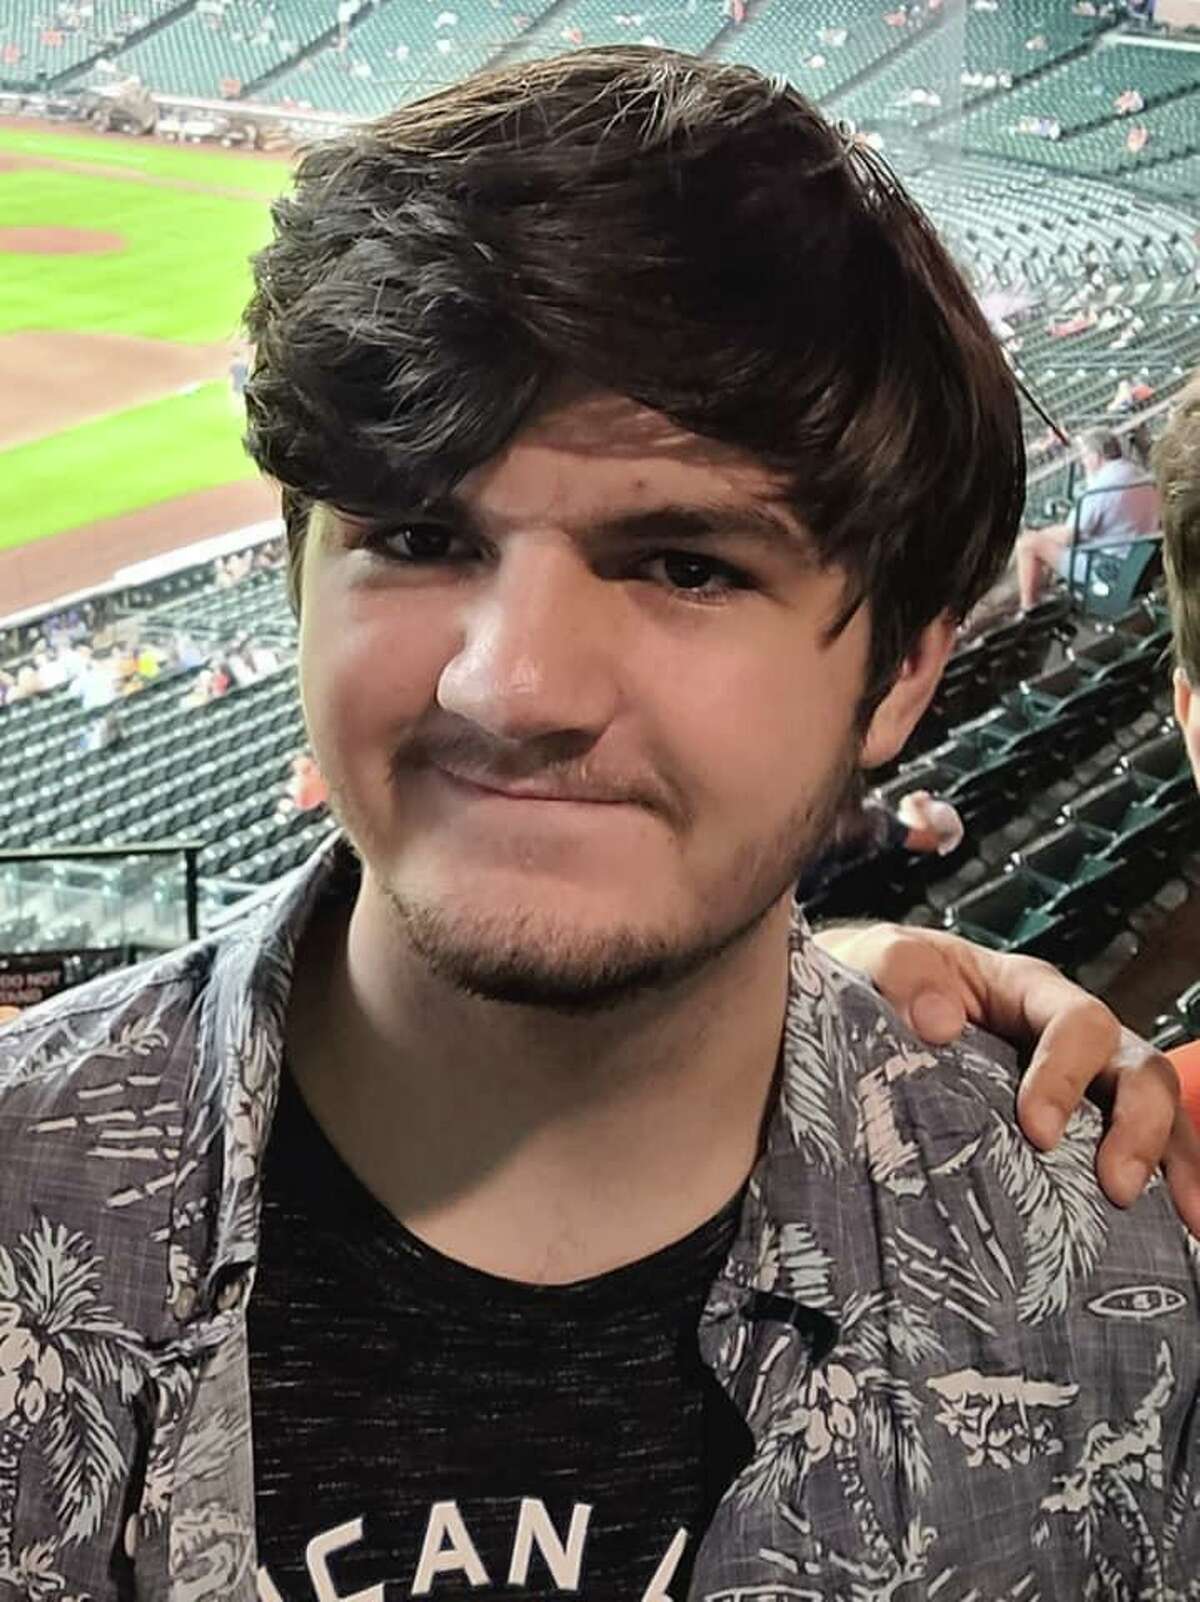 David Castro, 17, was fatally shot July 6 near Wayside Drive and Interstate 10 while on the way home from a Houston Astros game, police said. The man accused in the shooting turned surrendered to police Monday, Aug. 2.